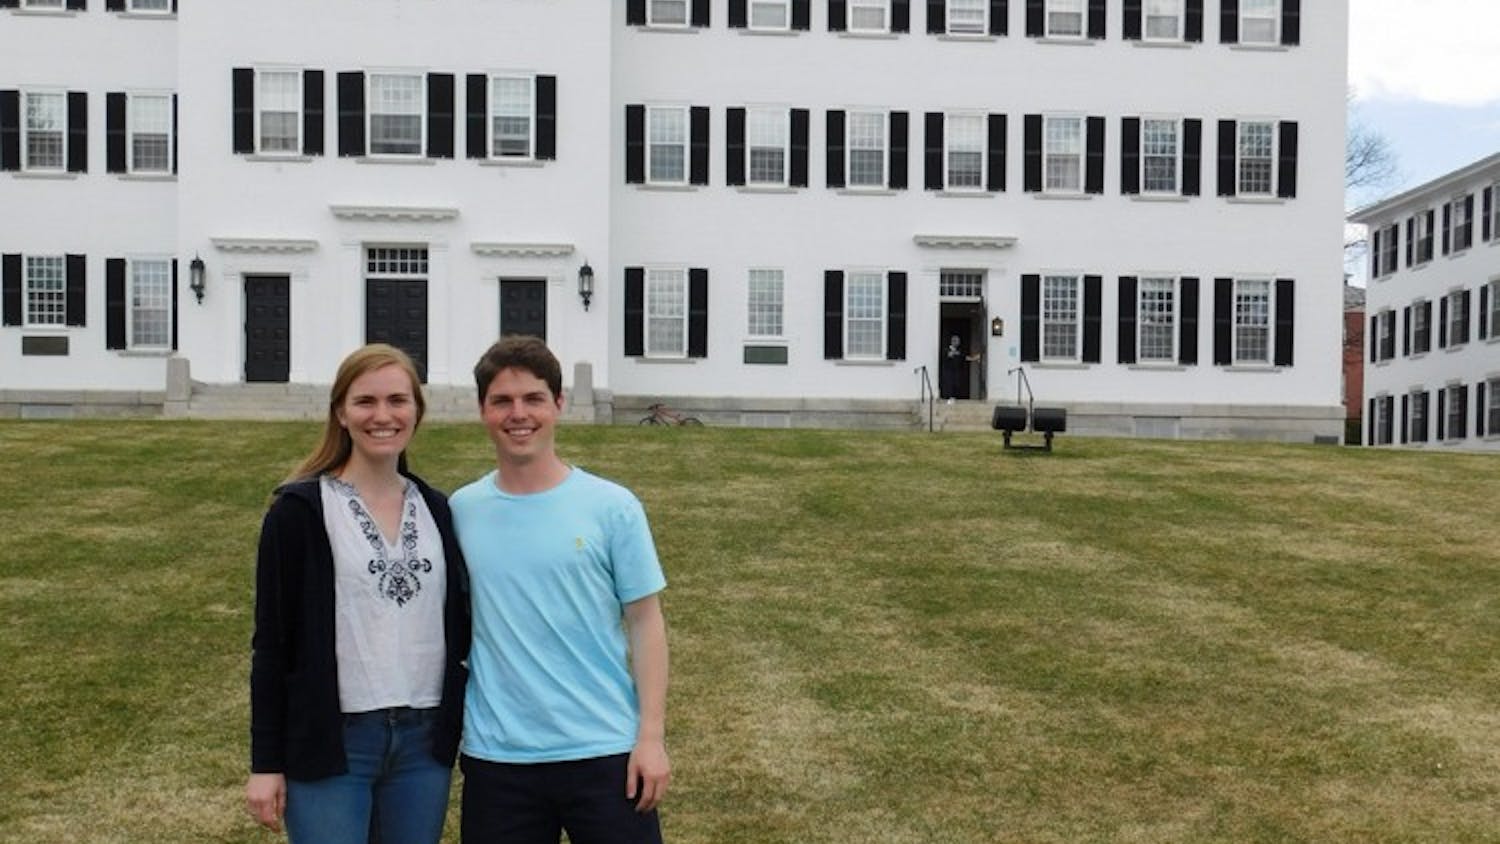 Nick Harrington '17 and Sally Portman '17 were elected as Student Assembly president and vice president.